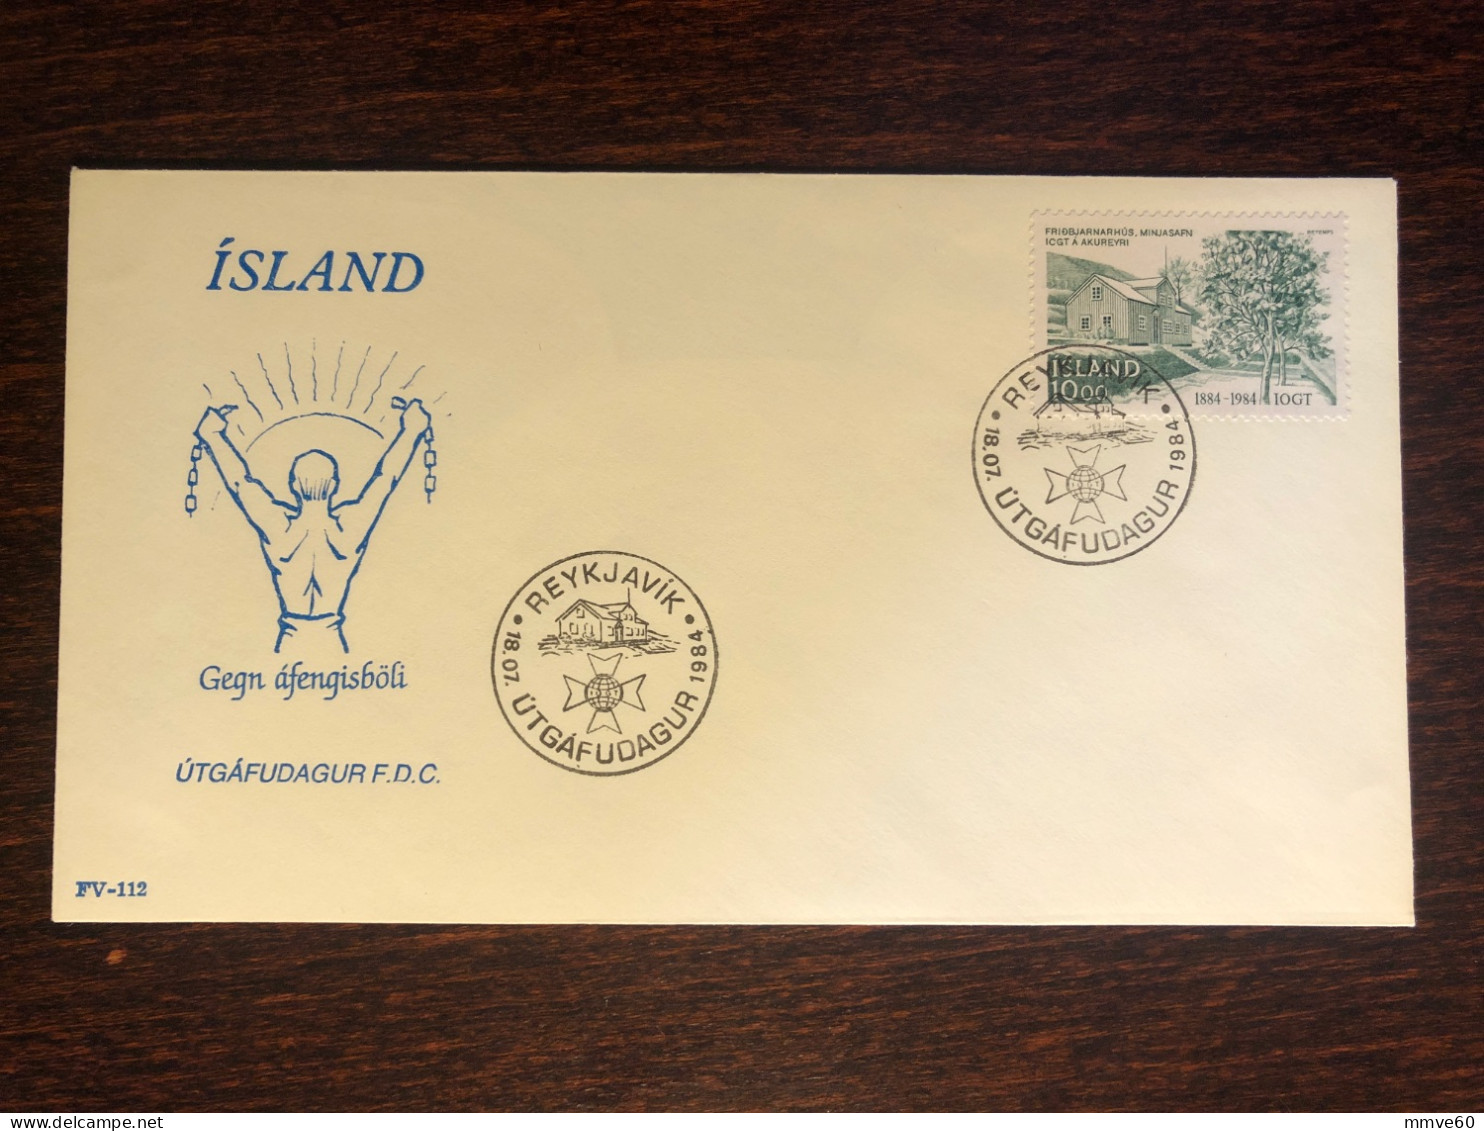 ICELAND FDC COVER 1984 YEAR ALCOHOLISM HEALTH MEDICINE STAMPS - FDC